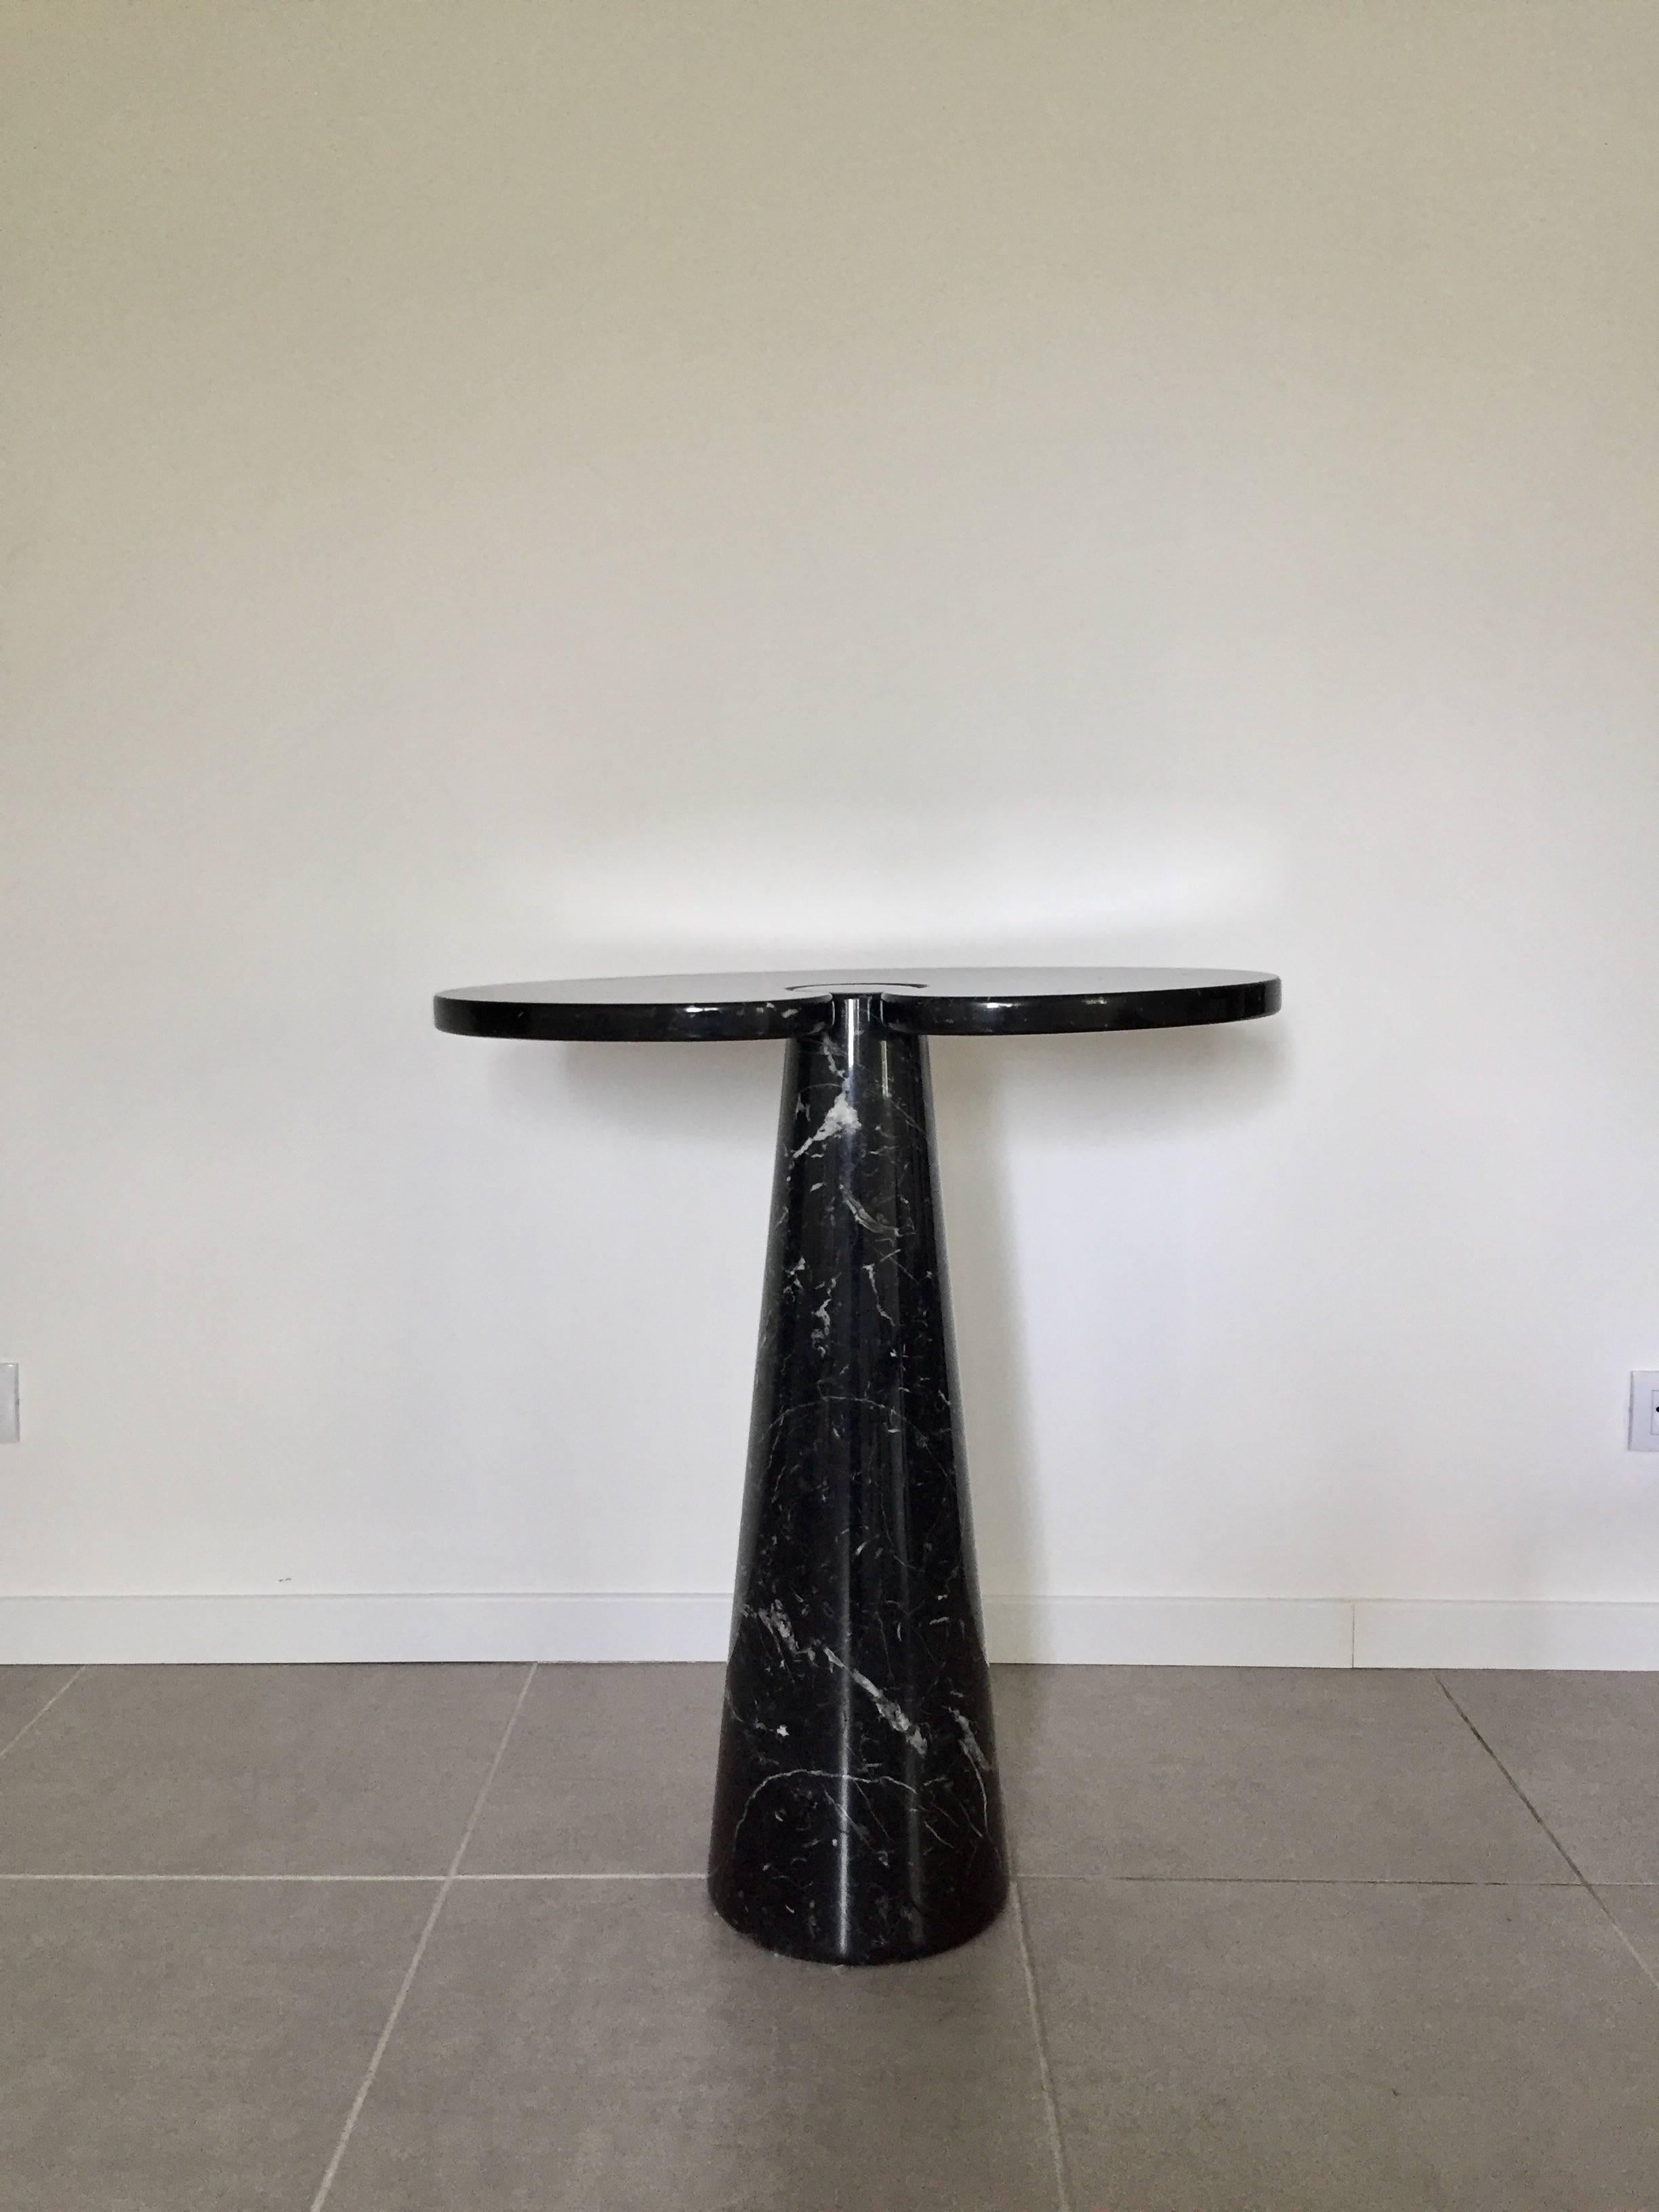 Elegant side table designed by Angelo Mangiarotti 
From the Eros series;
Manufactured by Skipper, circa 1971;
Black marble.